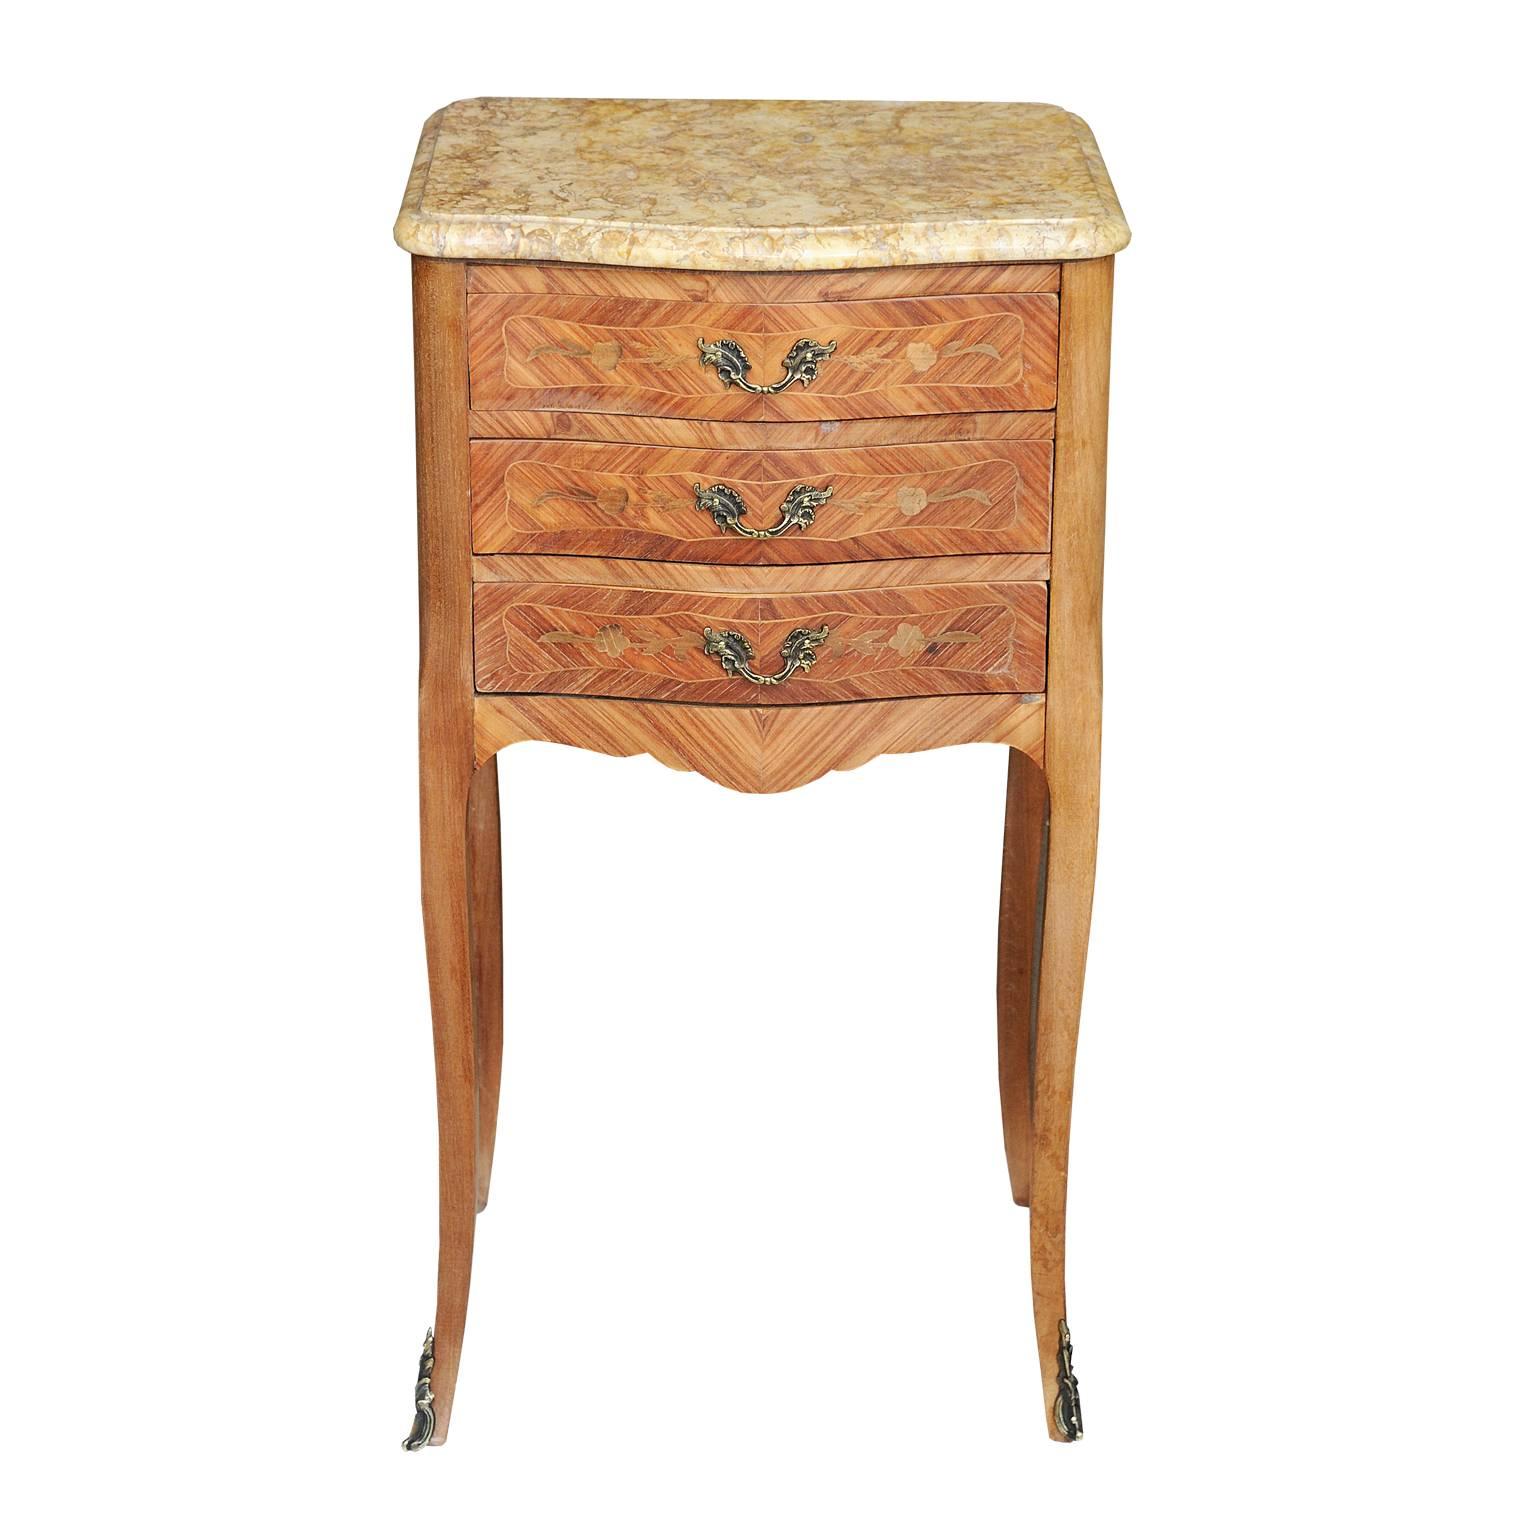 This is a pair of rather charming 19th Century French Louis XVI style inlaid dry walnut night/bedside tables, complete with three drawers and marble tops, circa 1880.